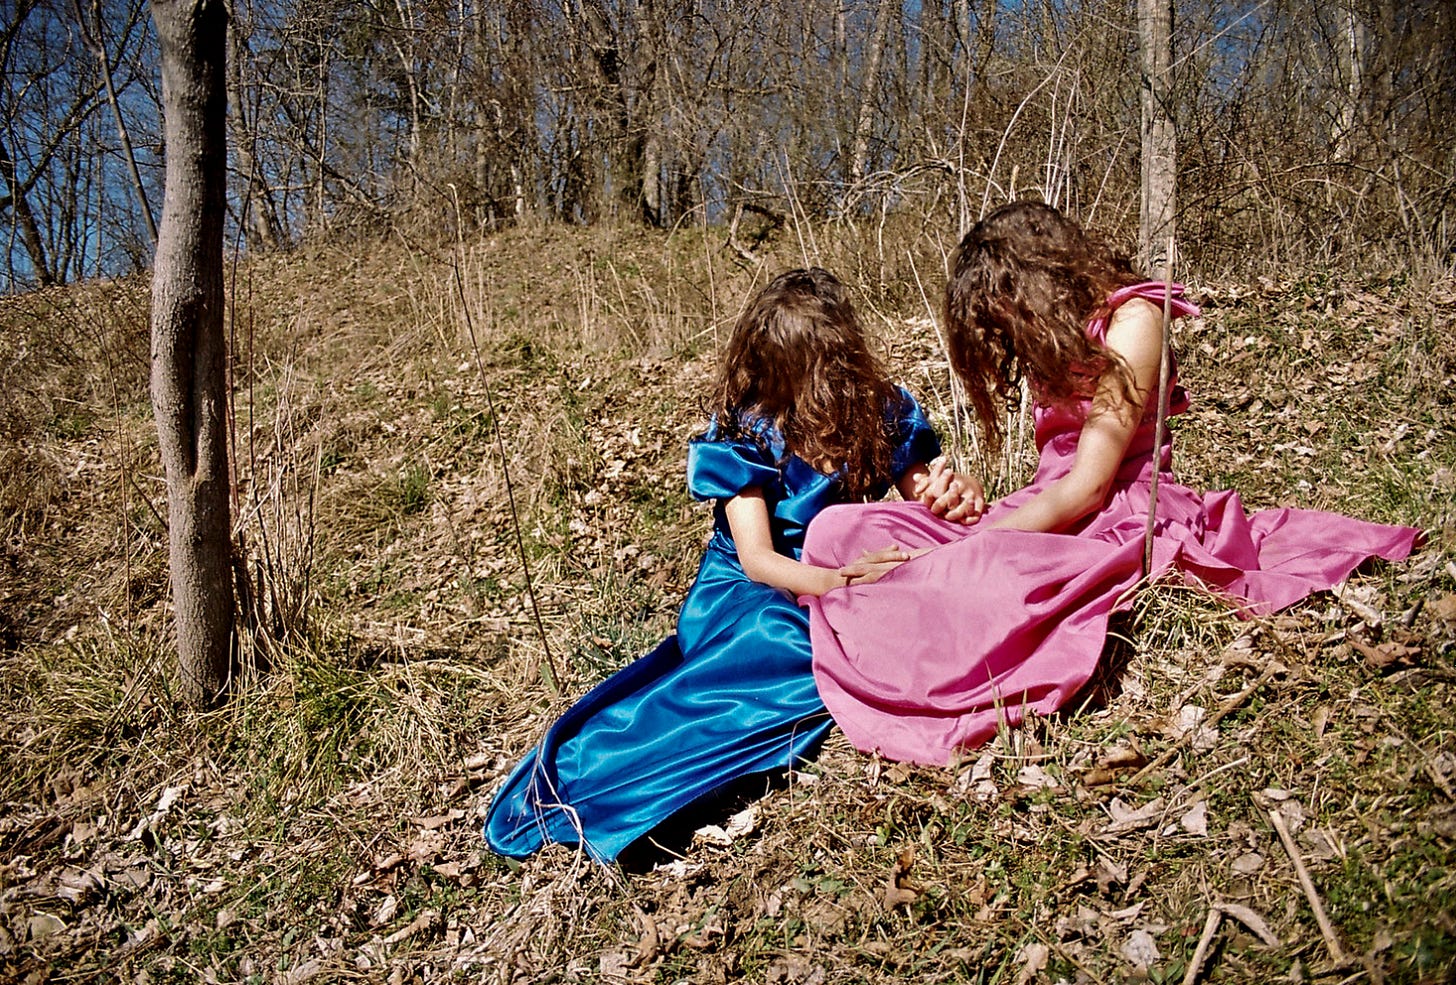 Two young girls sit on a hill in the woods surrounded by bare trees and brown leaves on the ground. Both of their heads bow down and their brown hair covers their faces. They each wear bright blue and pink dresses that contrast with the muted and barren background. 